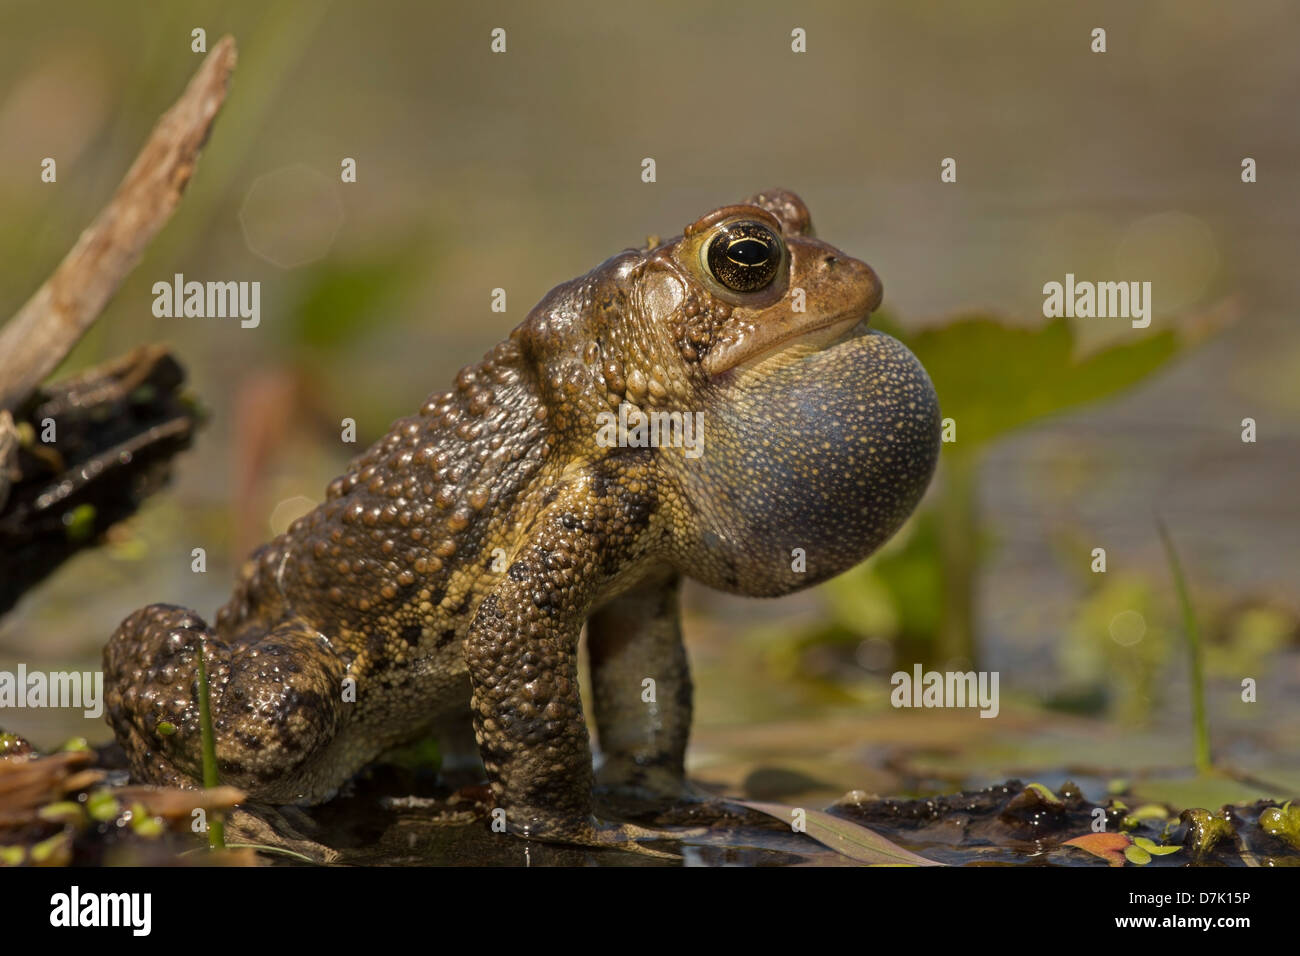 American toad - Bufo americanus - New York - Male calling to attract females Stock Photo